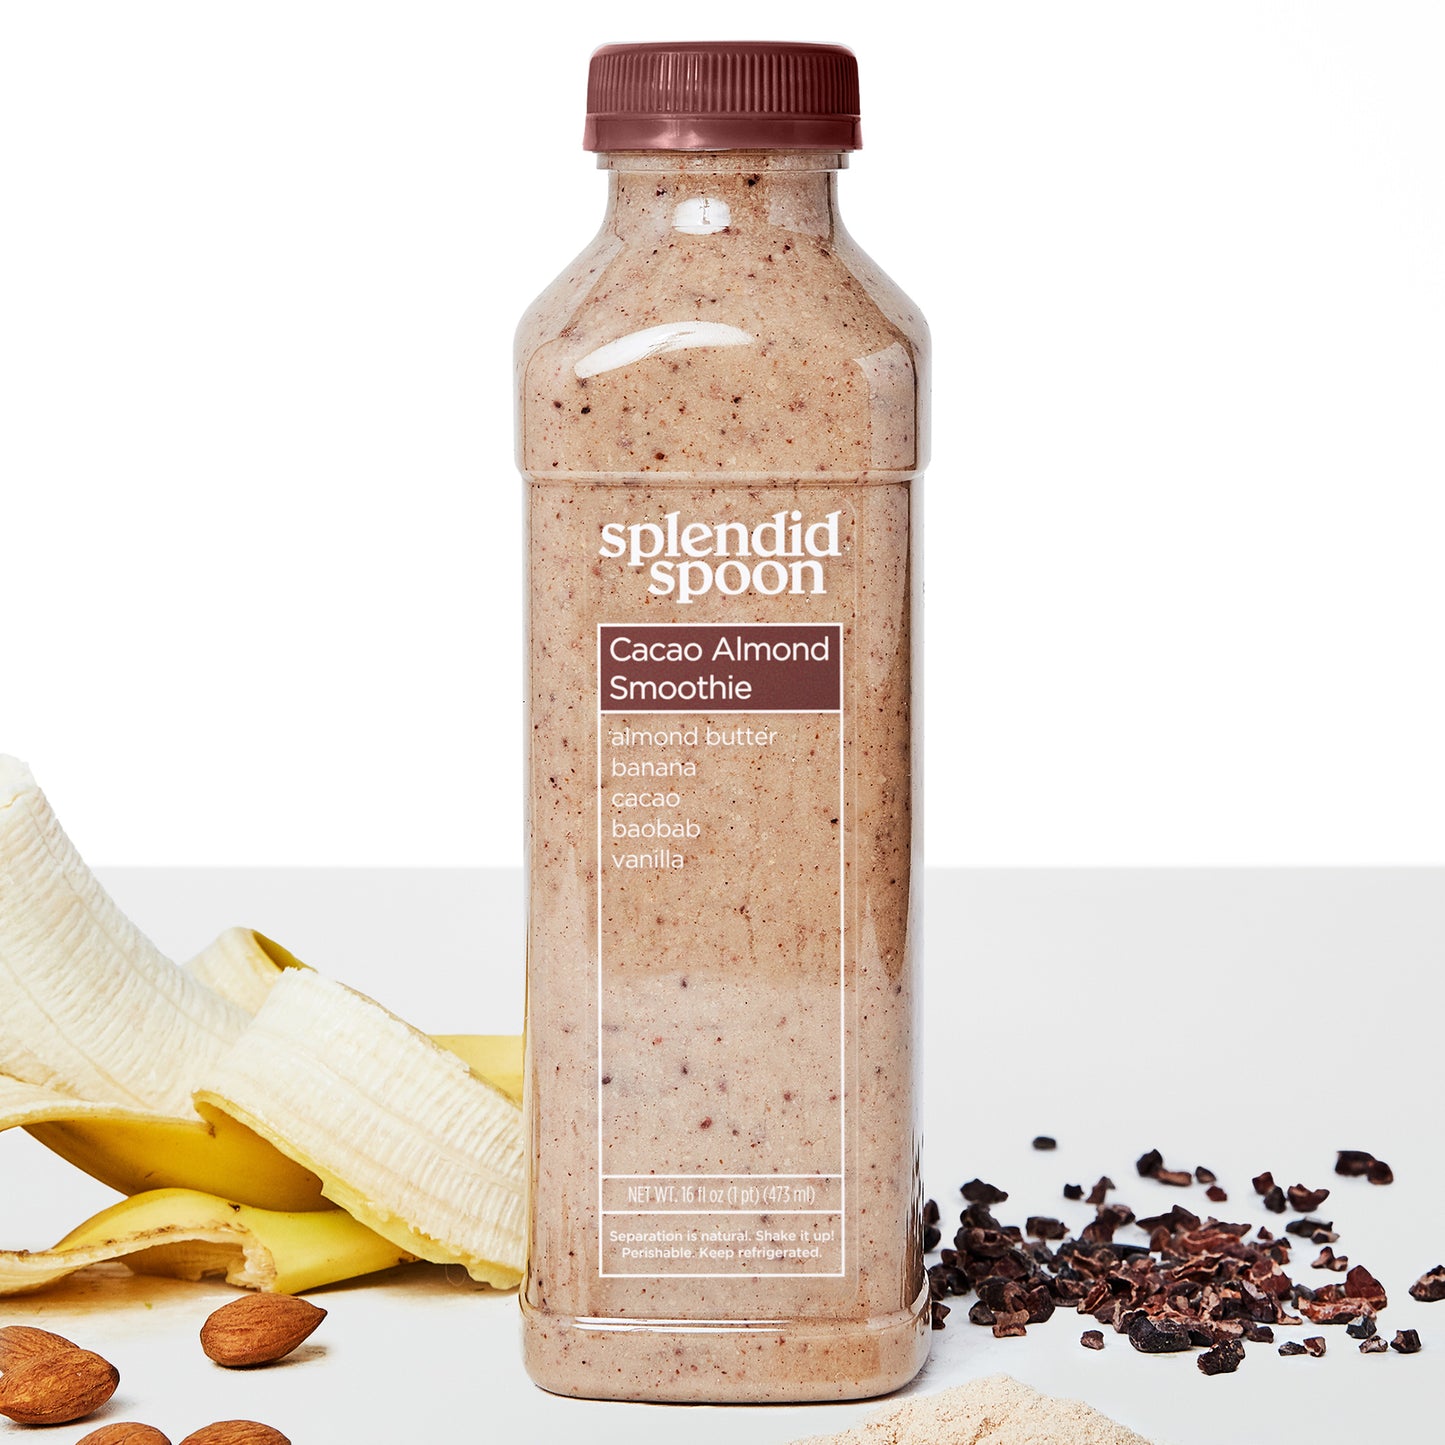 Cacao Almond Smoothie